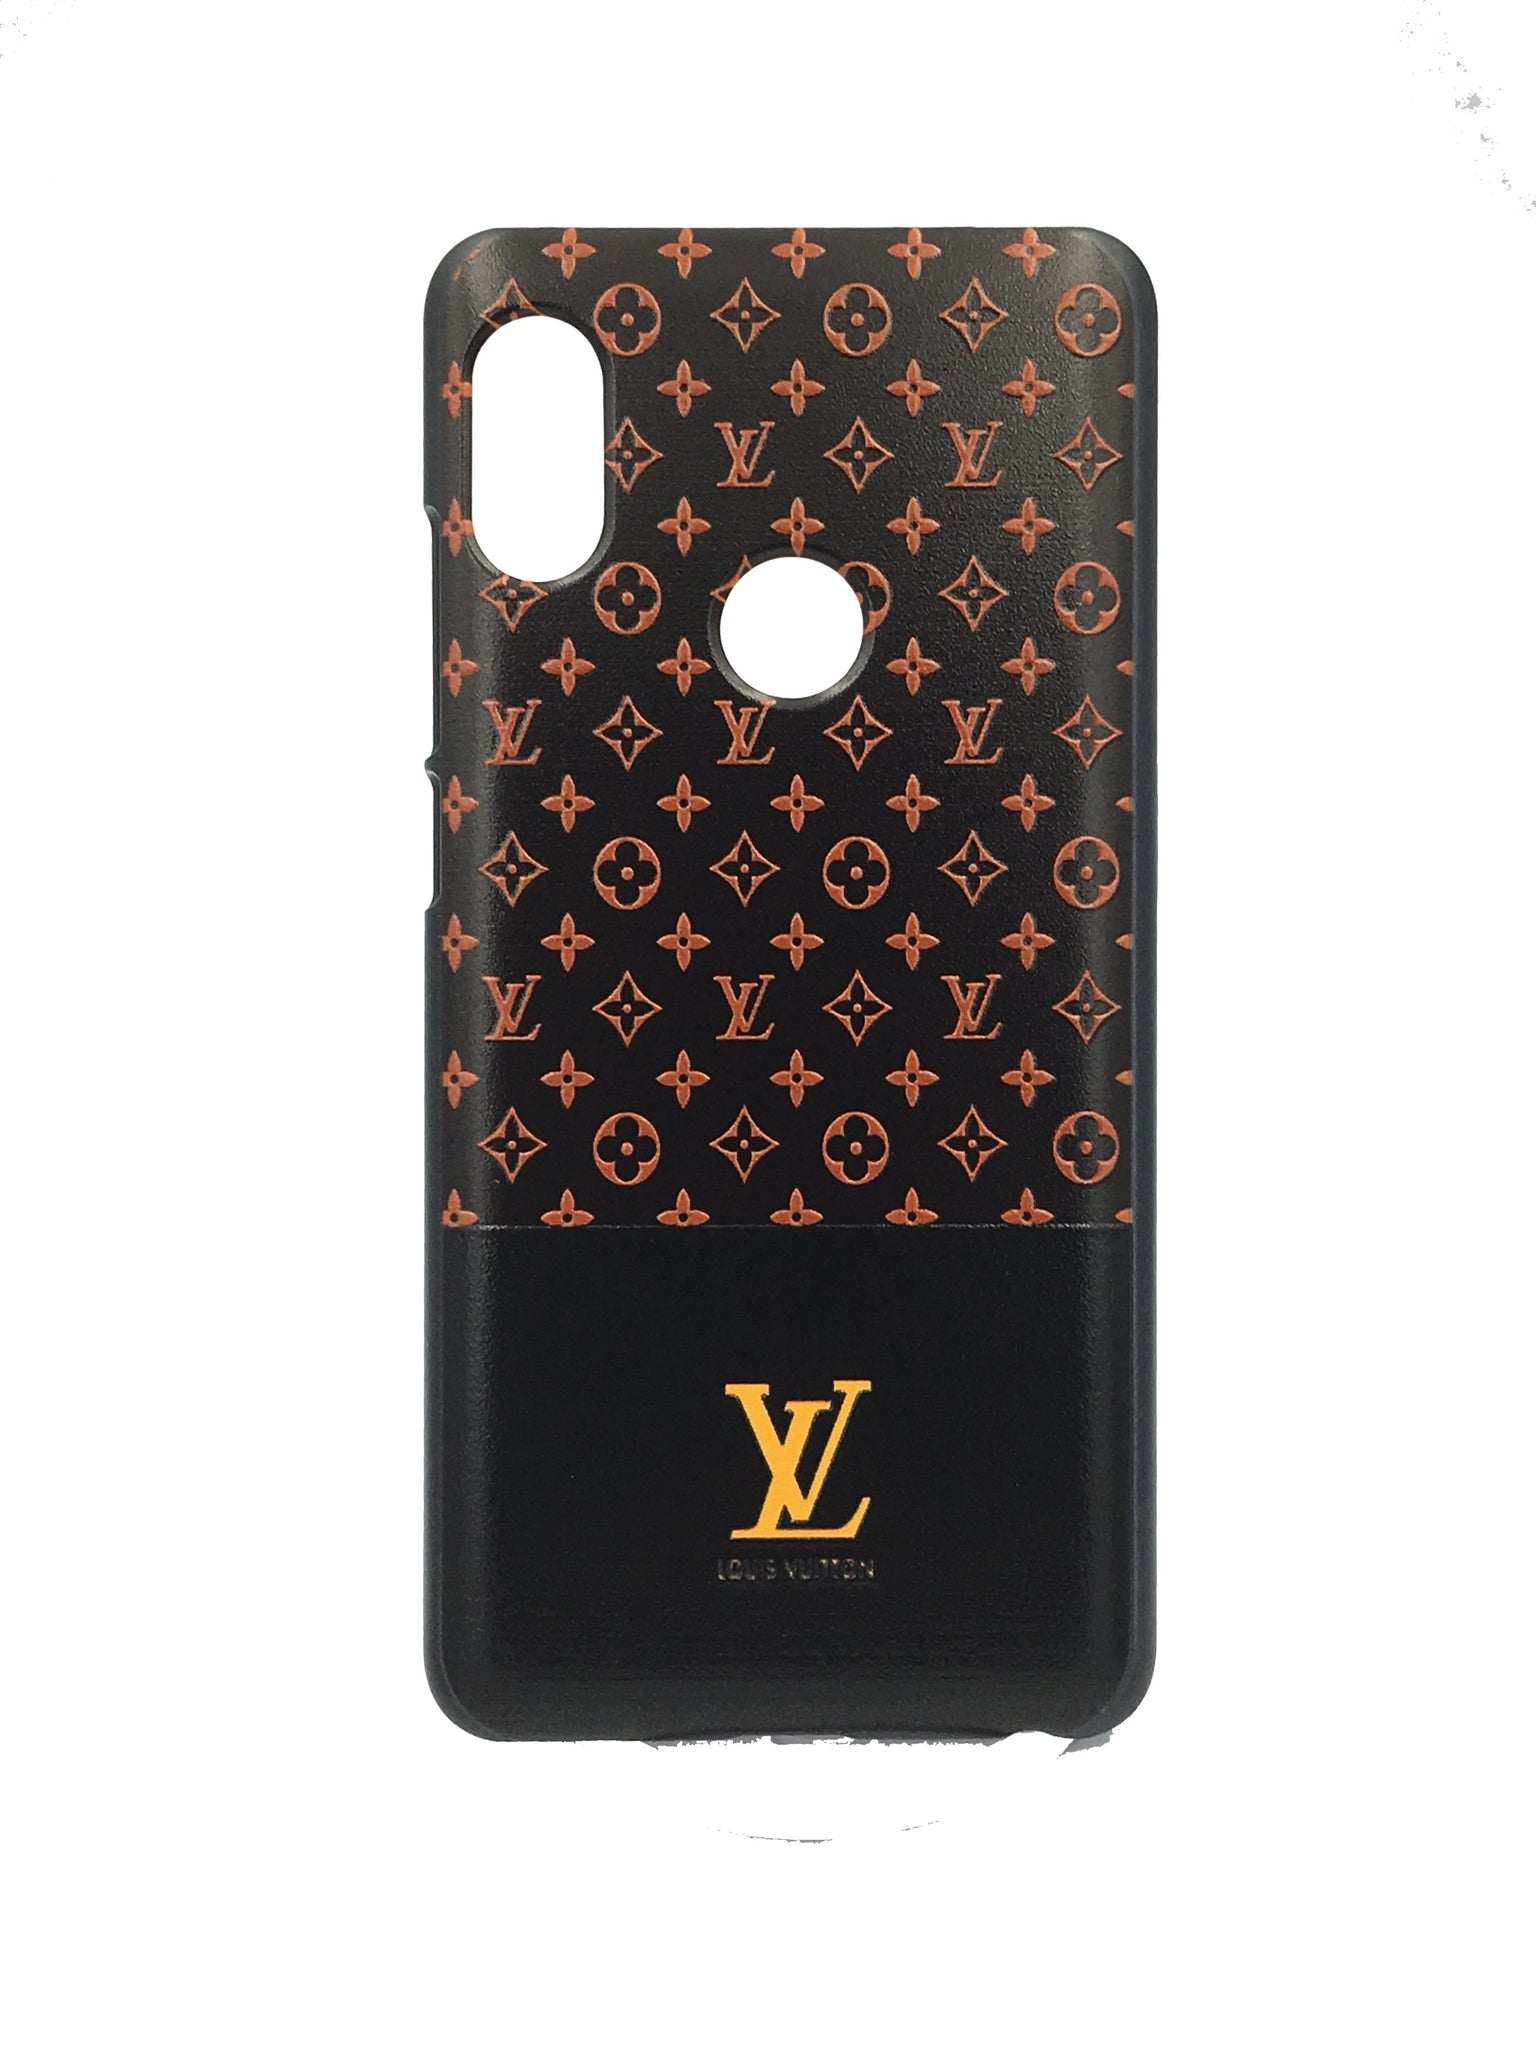 Louis Vuitton Protection Cover Case For Apple Airpods Pro For Airpods 1 2